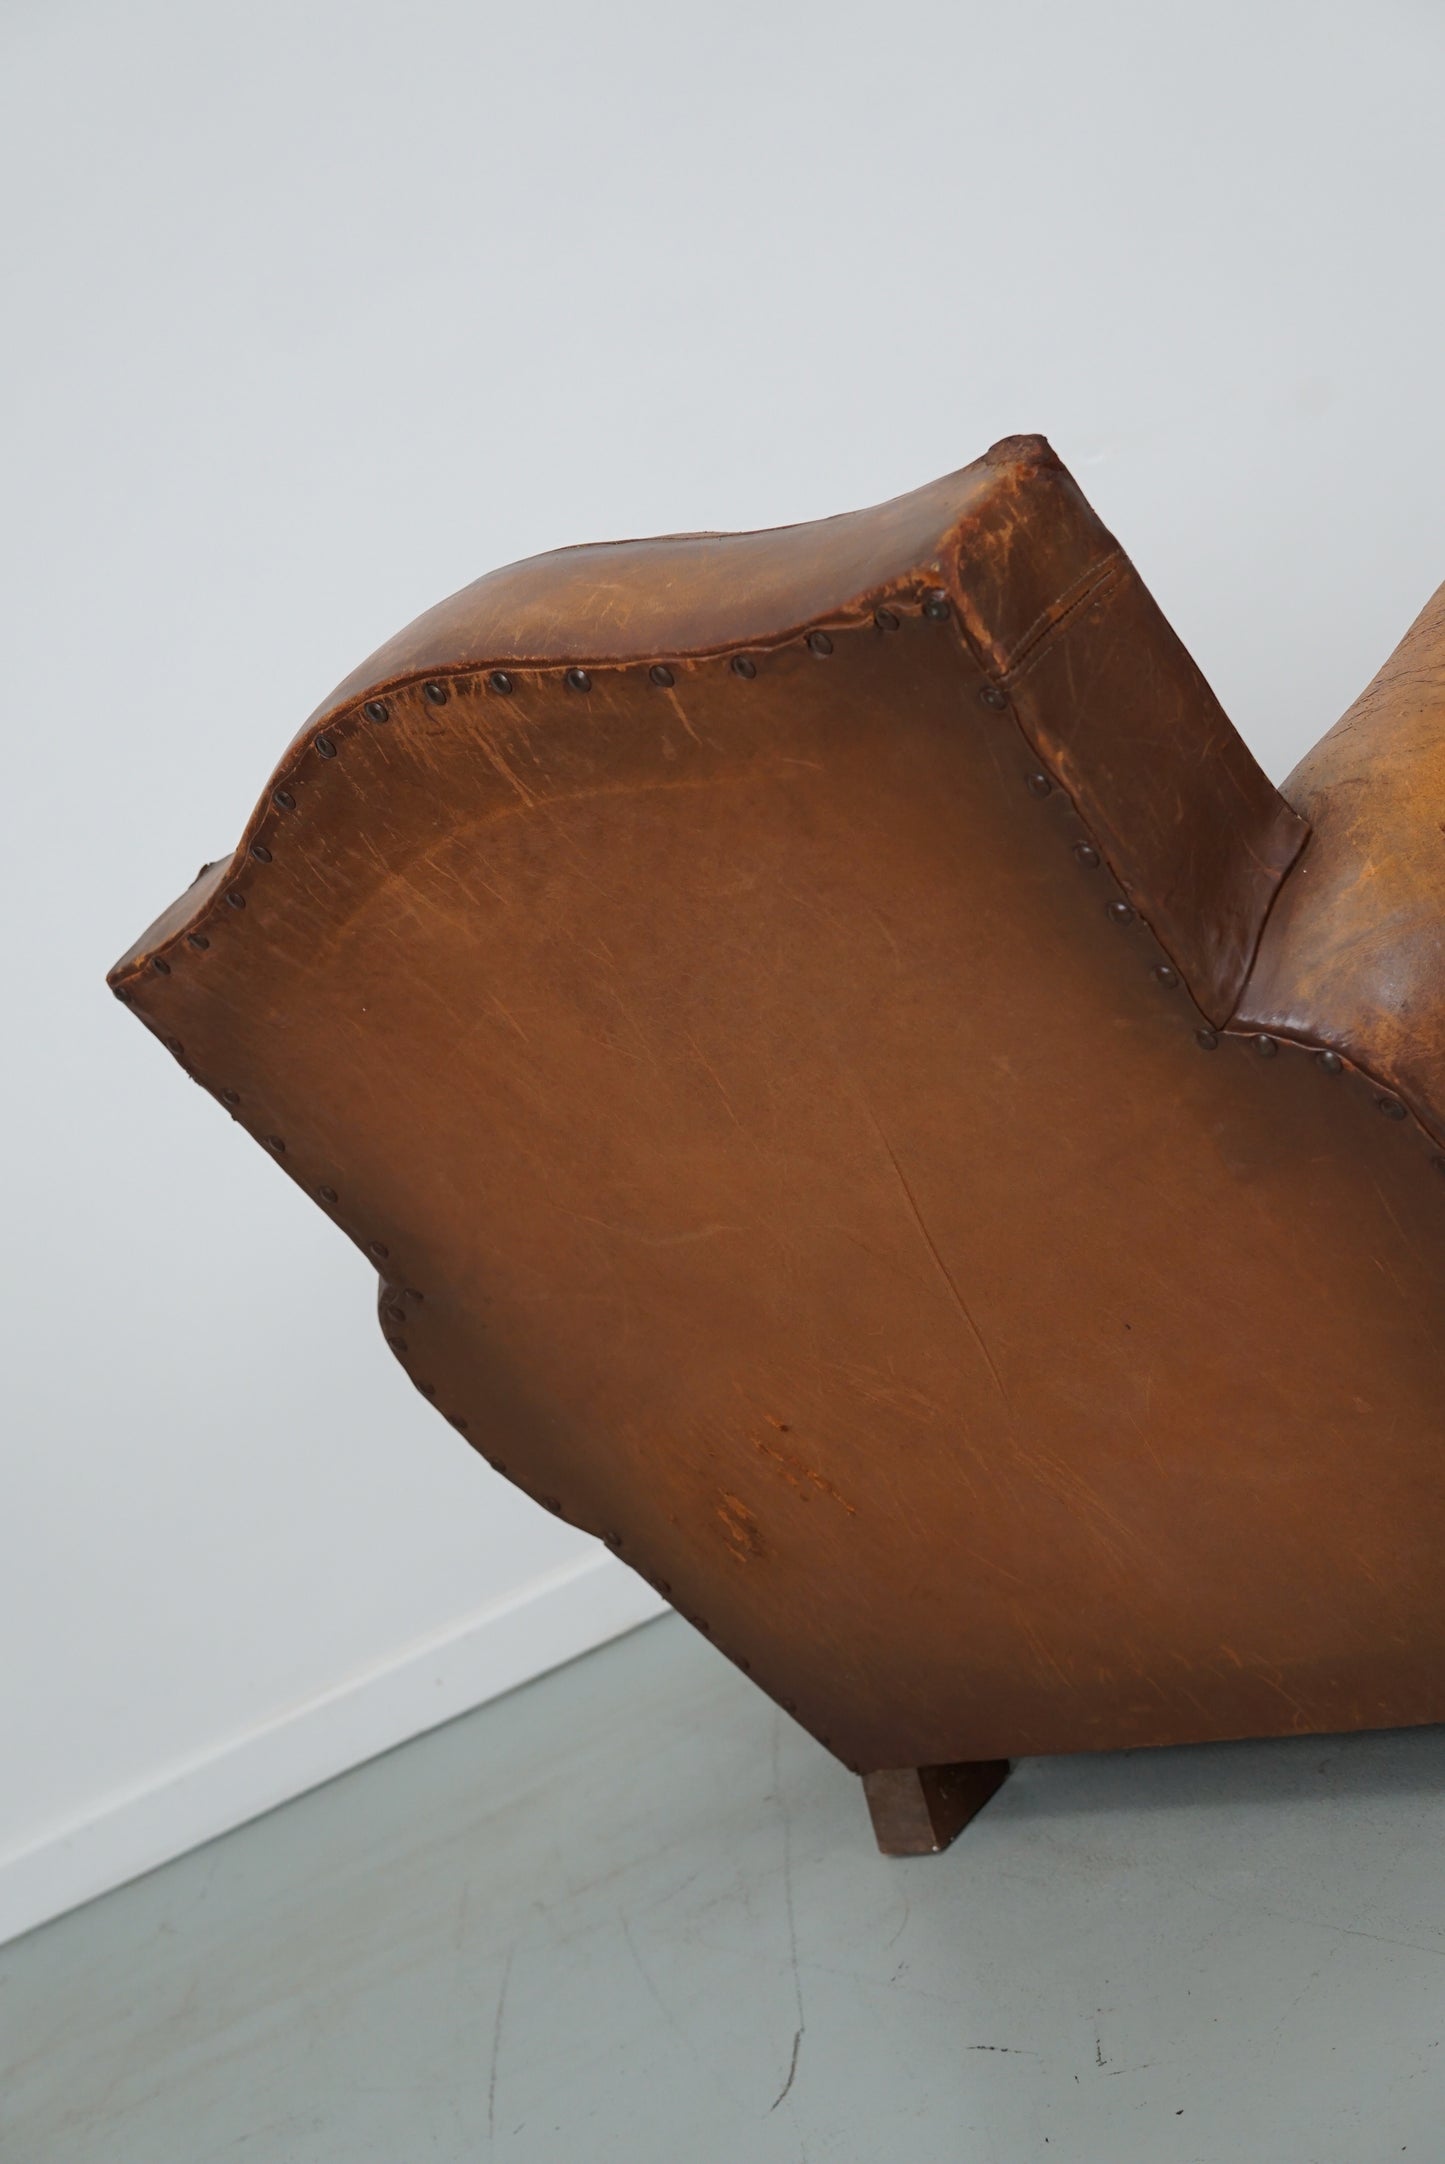 Vintage French Moustache Back Cognac-Colored Leather Club Chair, 1940s